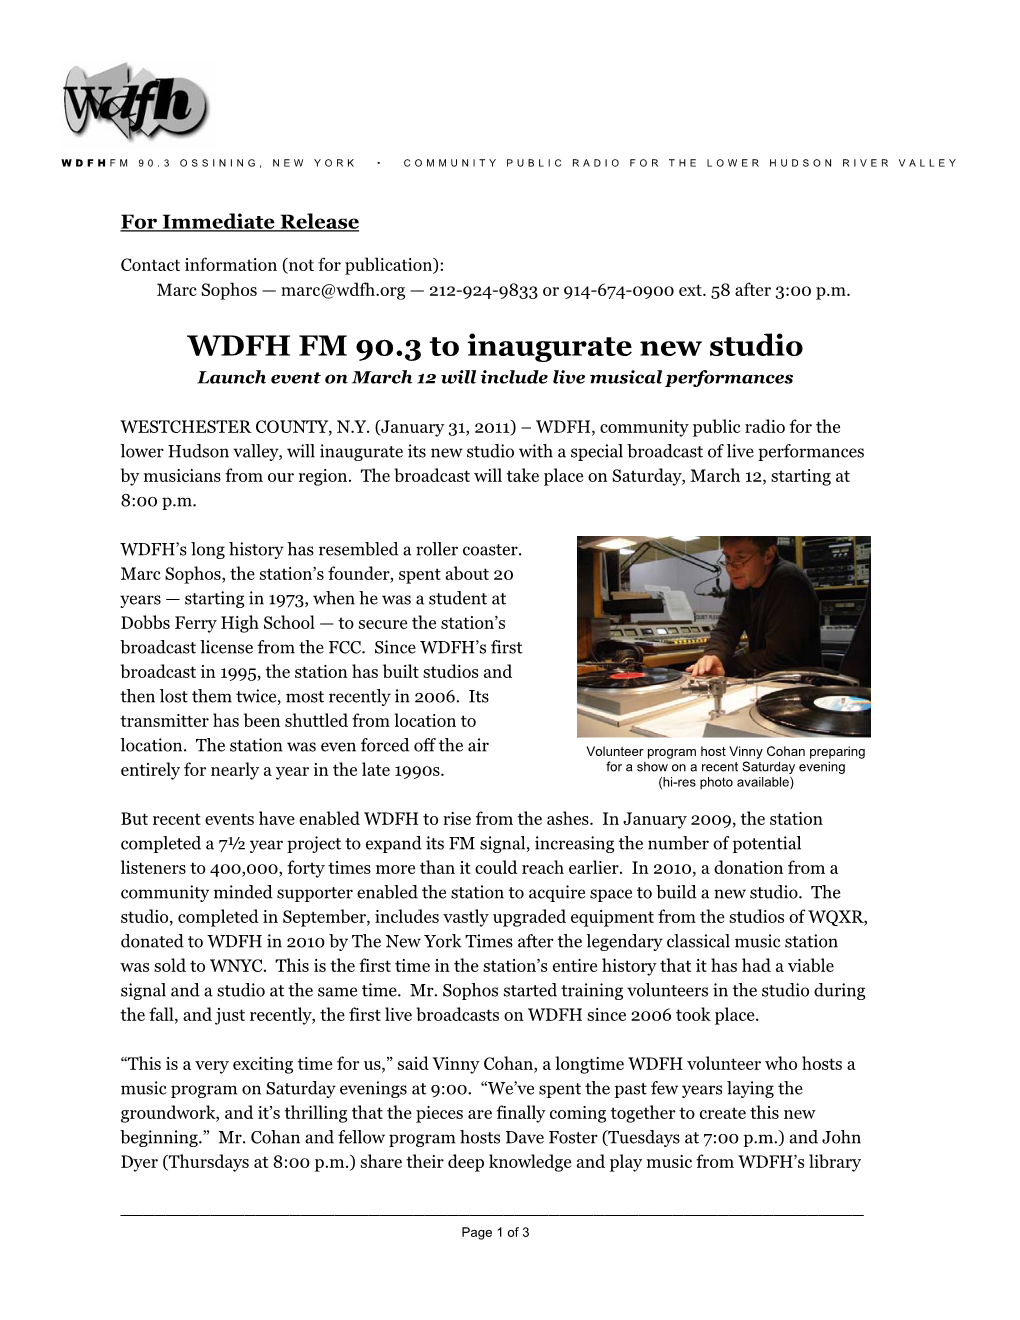 WDFH FM 90.3 to Inaugurate New Studio Launch Event on March 12 Will Include Live Musical Performances